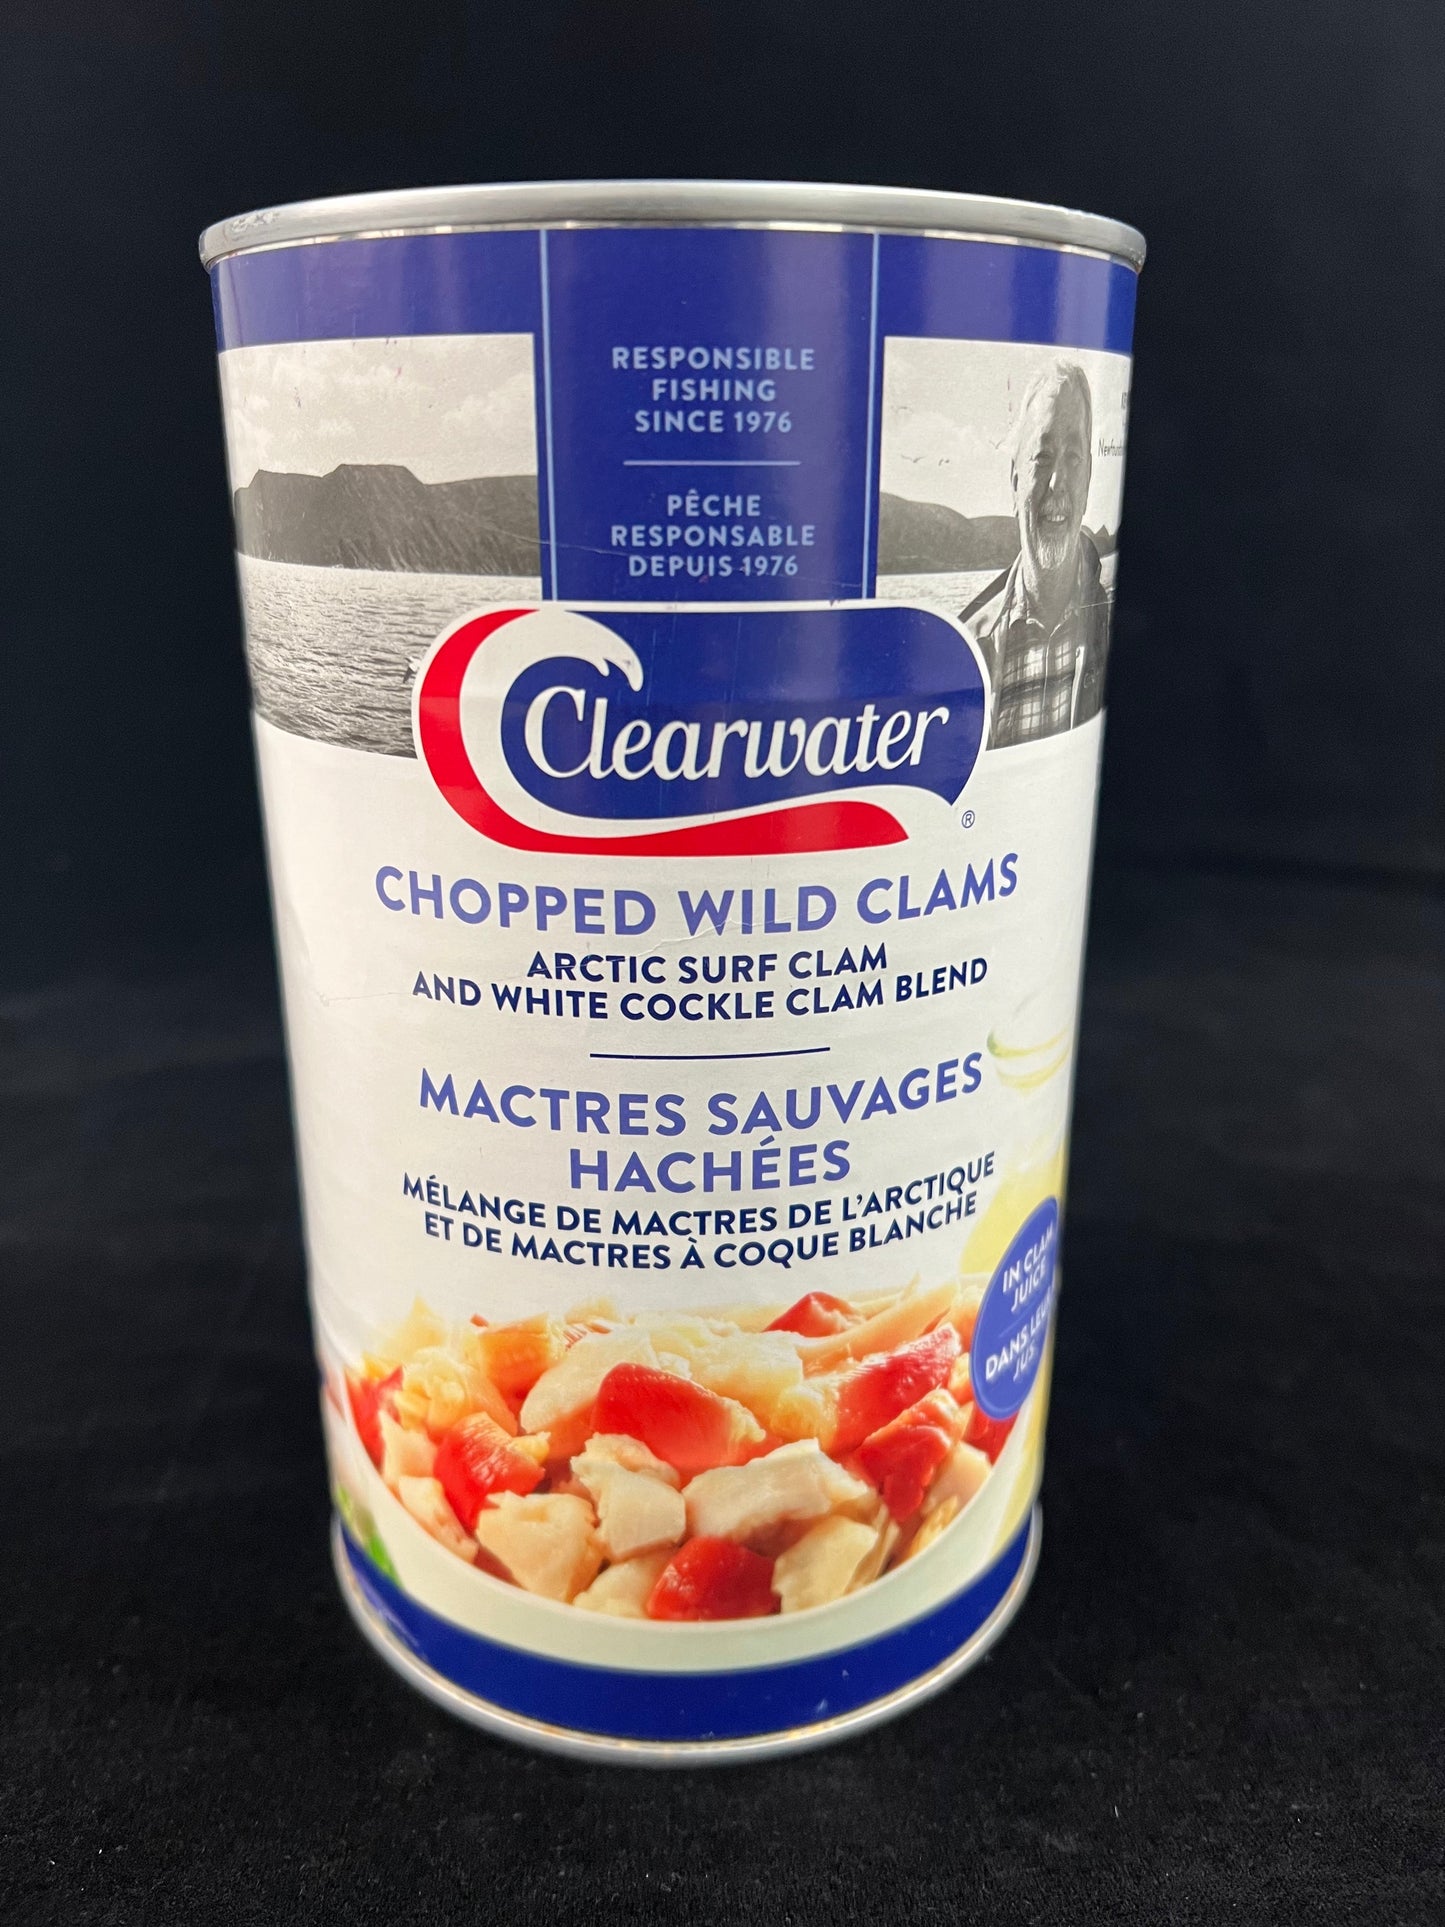 Clearwater -  Mactres sauvages hachées / Chopped Wild Clams - Boite (12 x 567g)